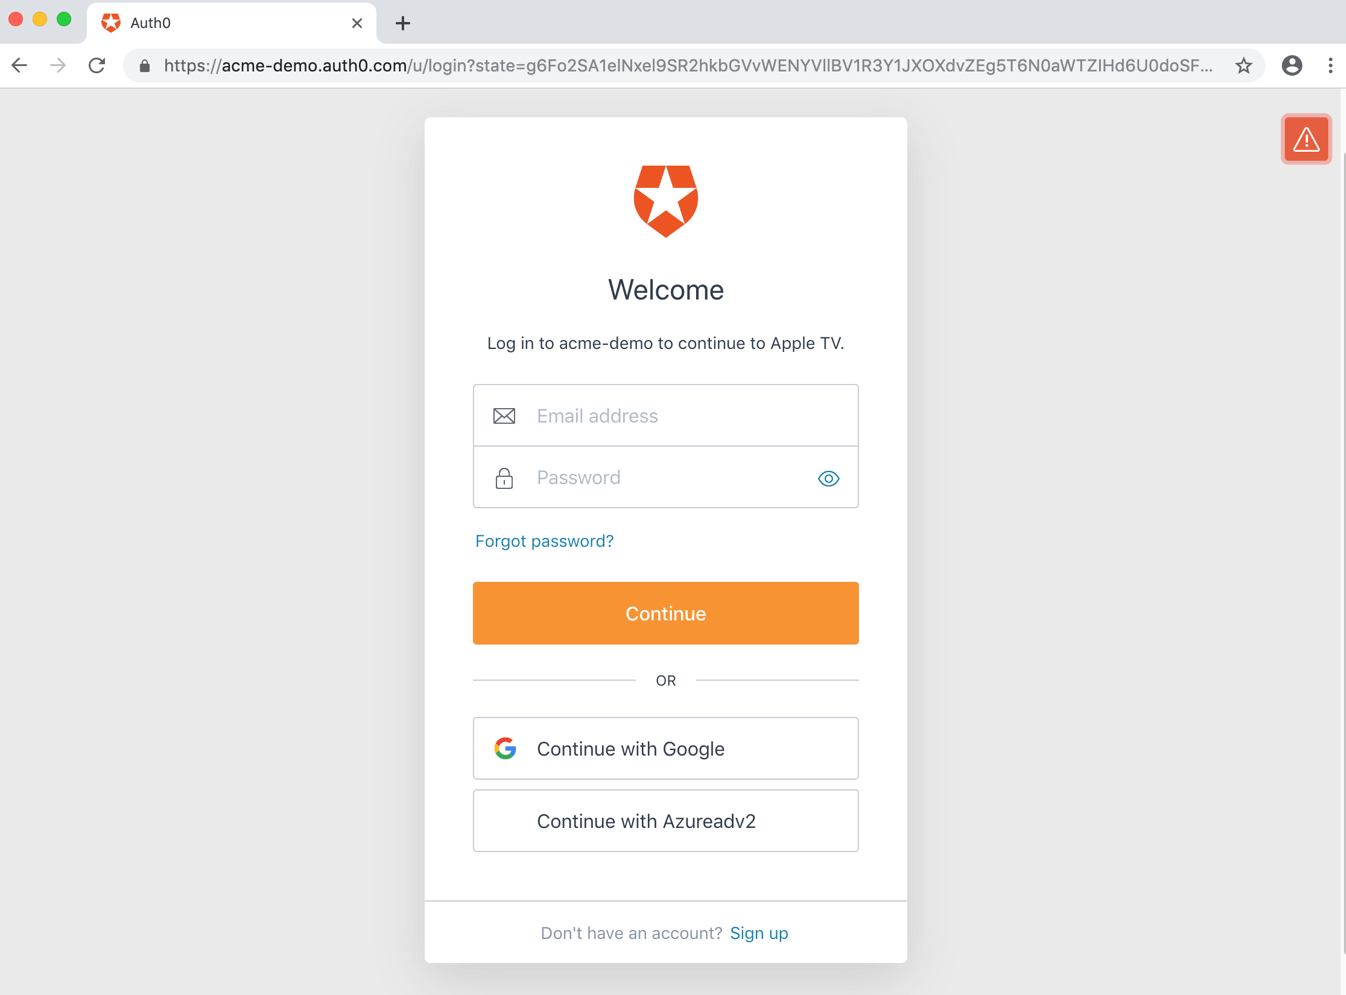 Auth0 Flows Device Authorization User authorization prompt directing the user to log in with email and password or with Google or another identity